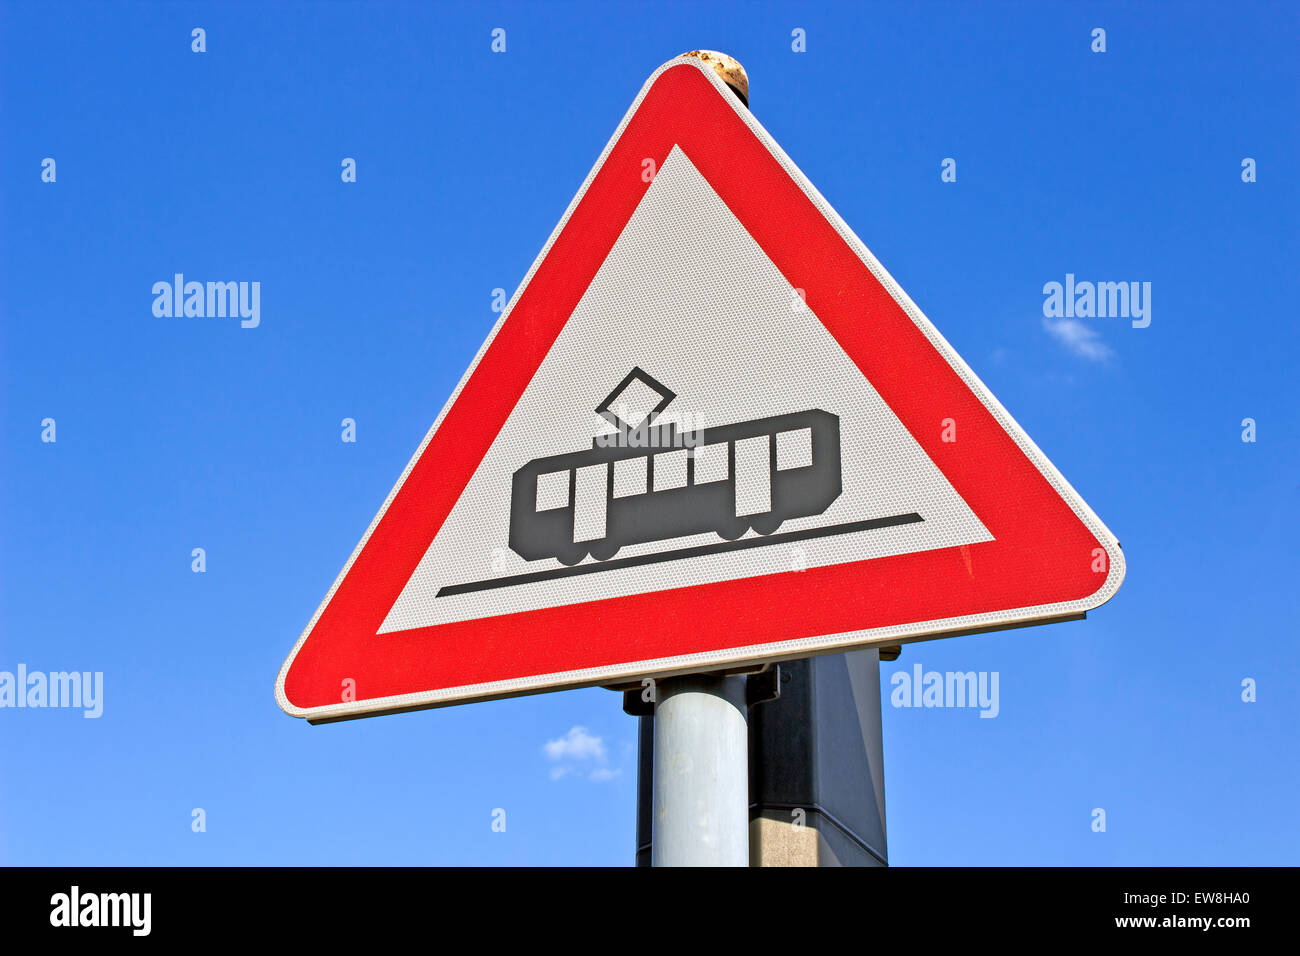 Traffic sign for tram on the road over blue sky Stock Photo